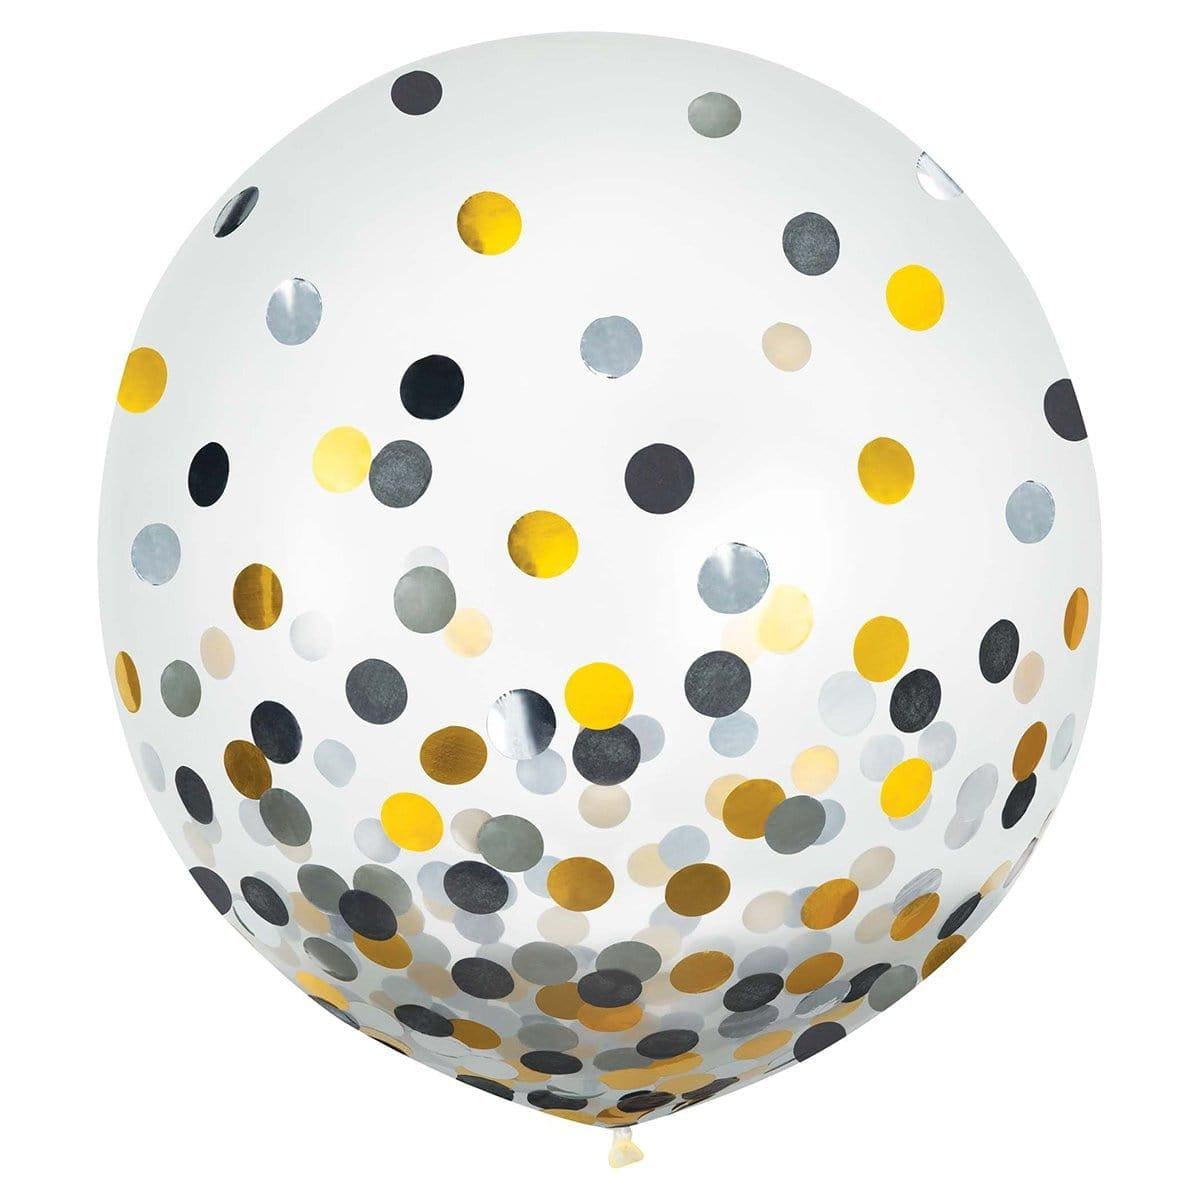 Buy Balloons Latex Balloons With Black, Silver and Gold Confetti, 24 Inches, 2 Count sold at Party Expert